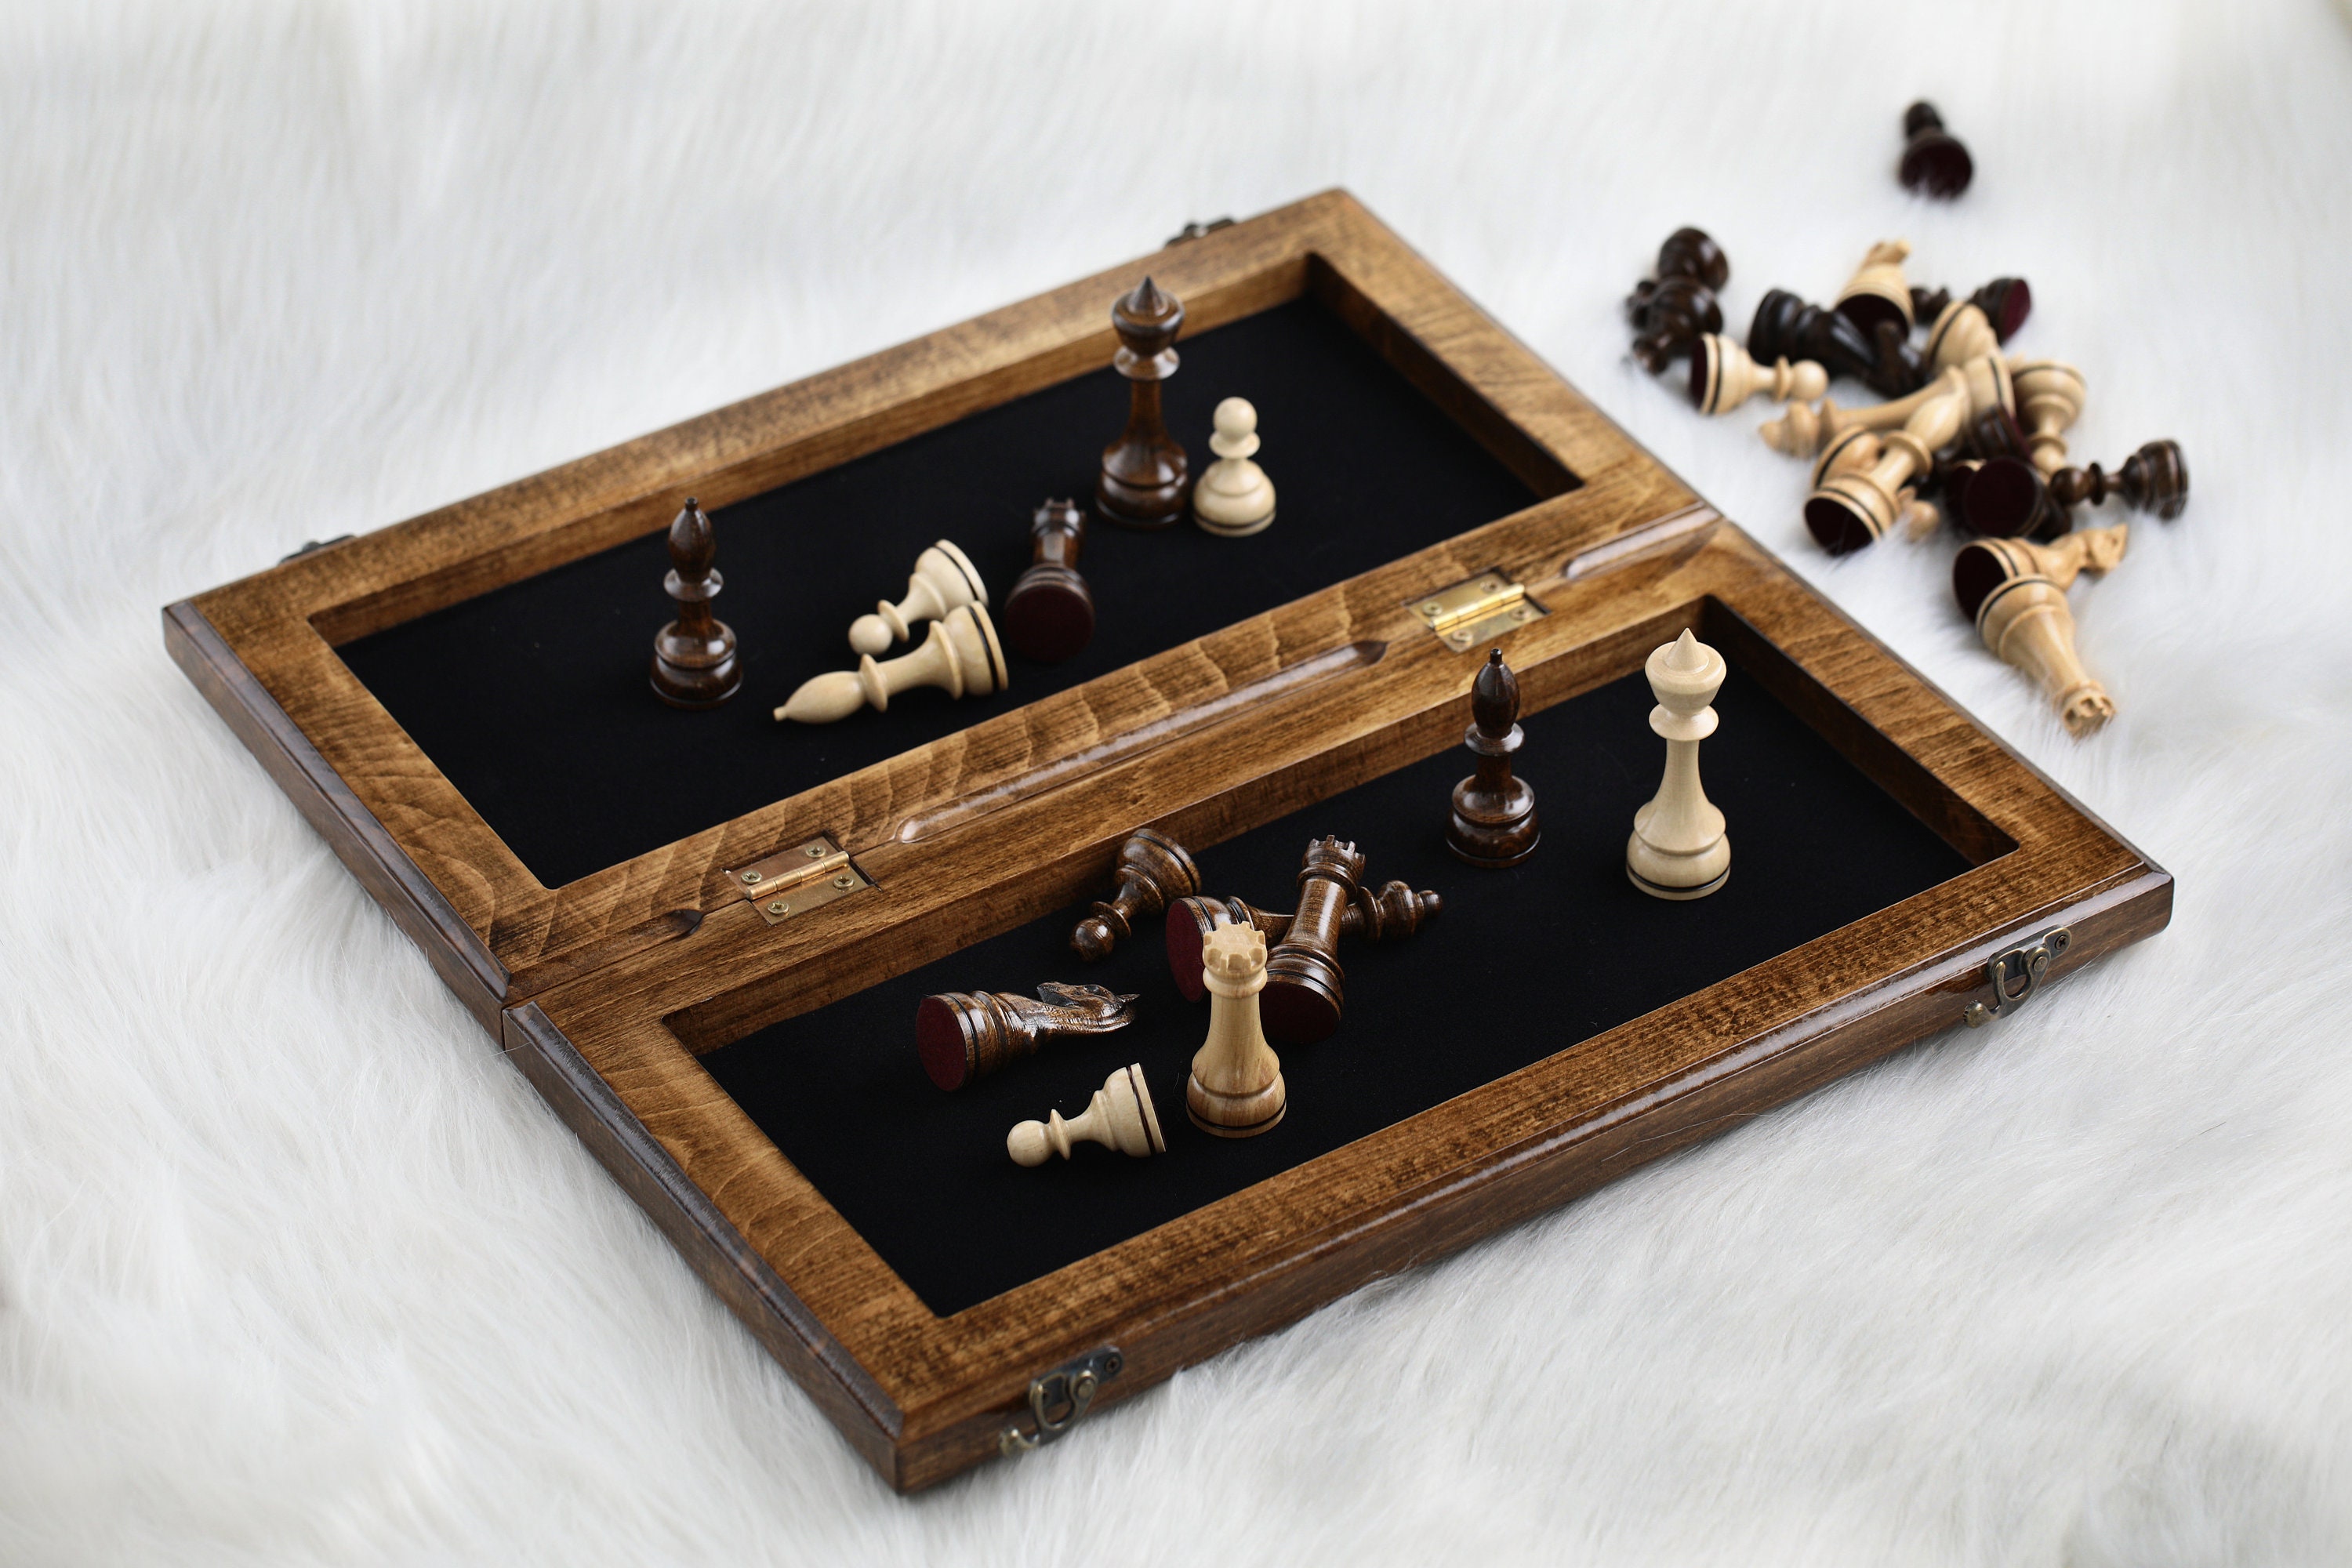  Large Personalized Chess Set - Boxed Custom Chess Board and  Metal Chess Figures Set - Gift Idea for Son, Husband, Father - 2 Sizes  (Large 14.2x14.2) : Toys & Games